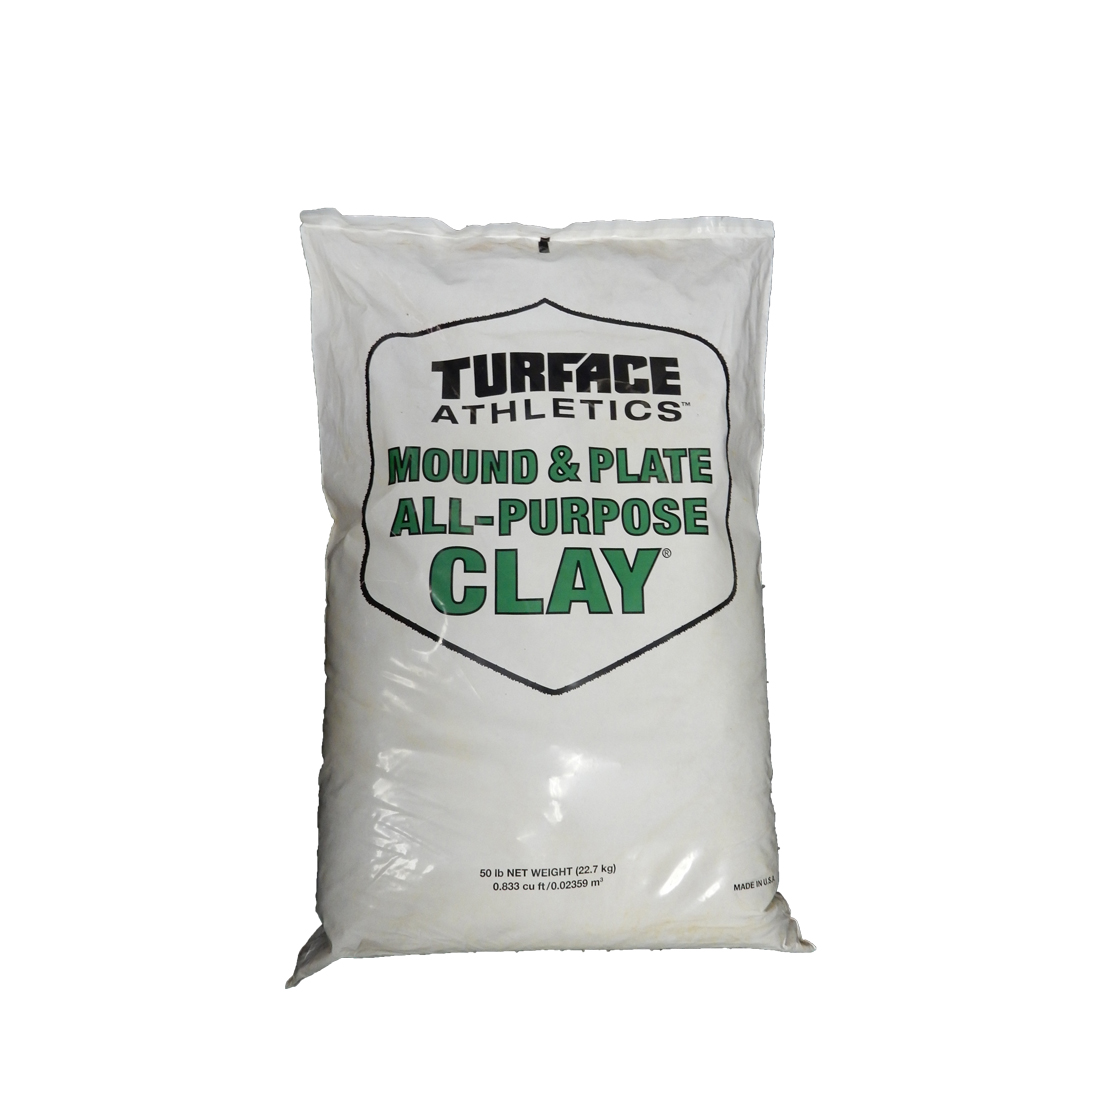 Mound & Plate All Purpose Clay 50 lb Bag - 40 per pallet